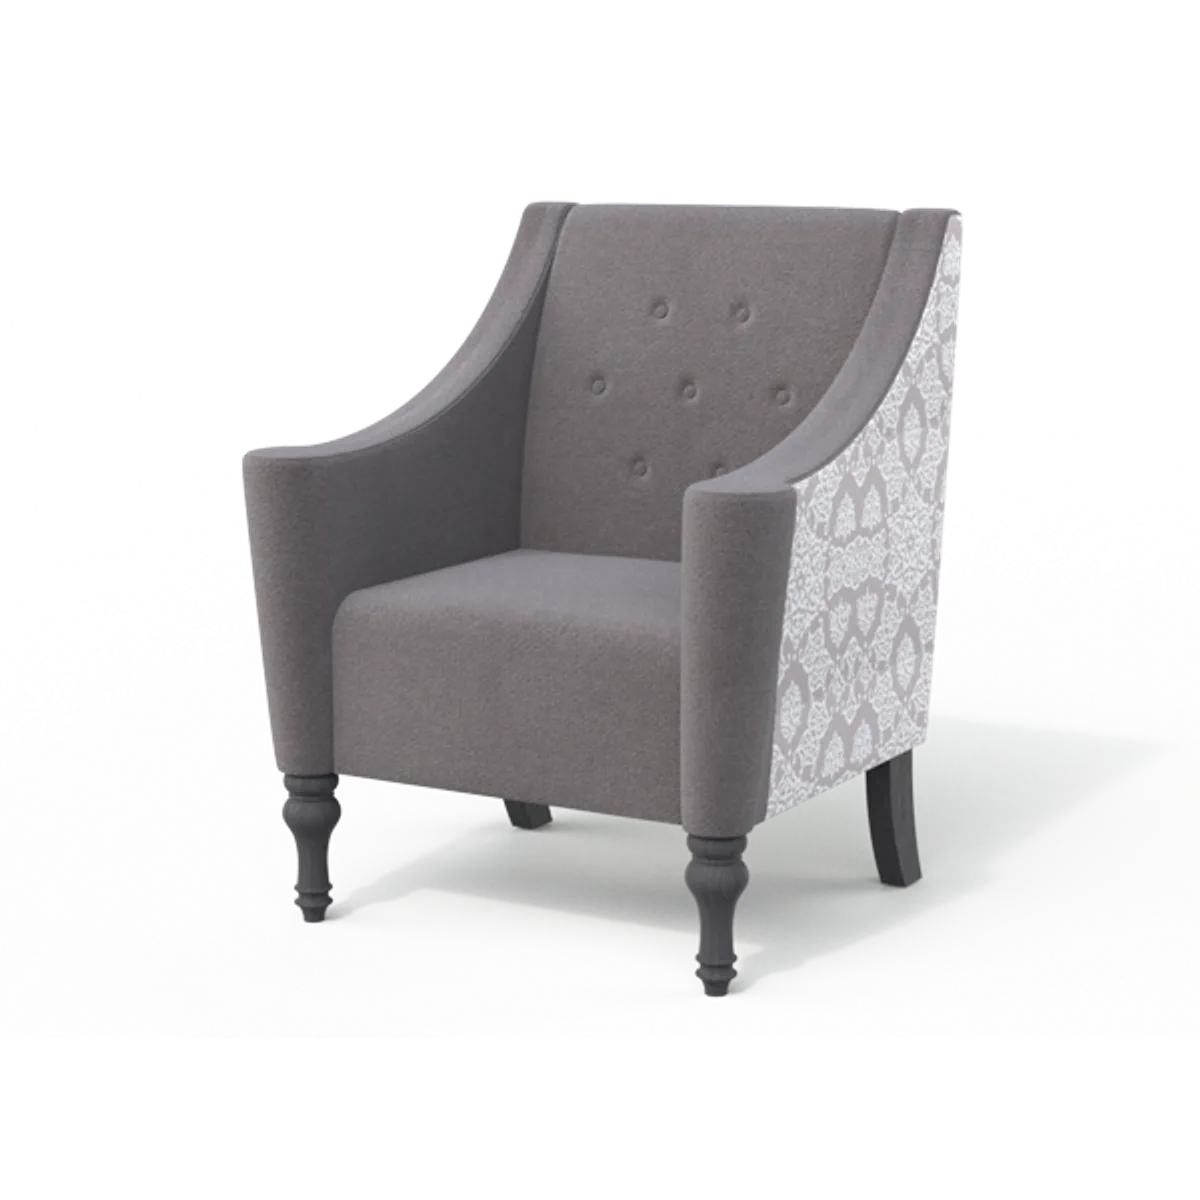 Scroll Armchair Inside Out Contracts Bespoke